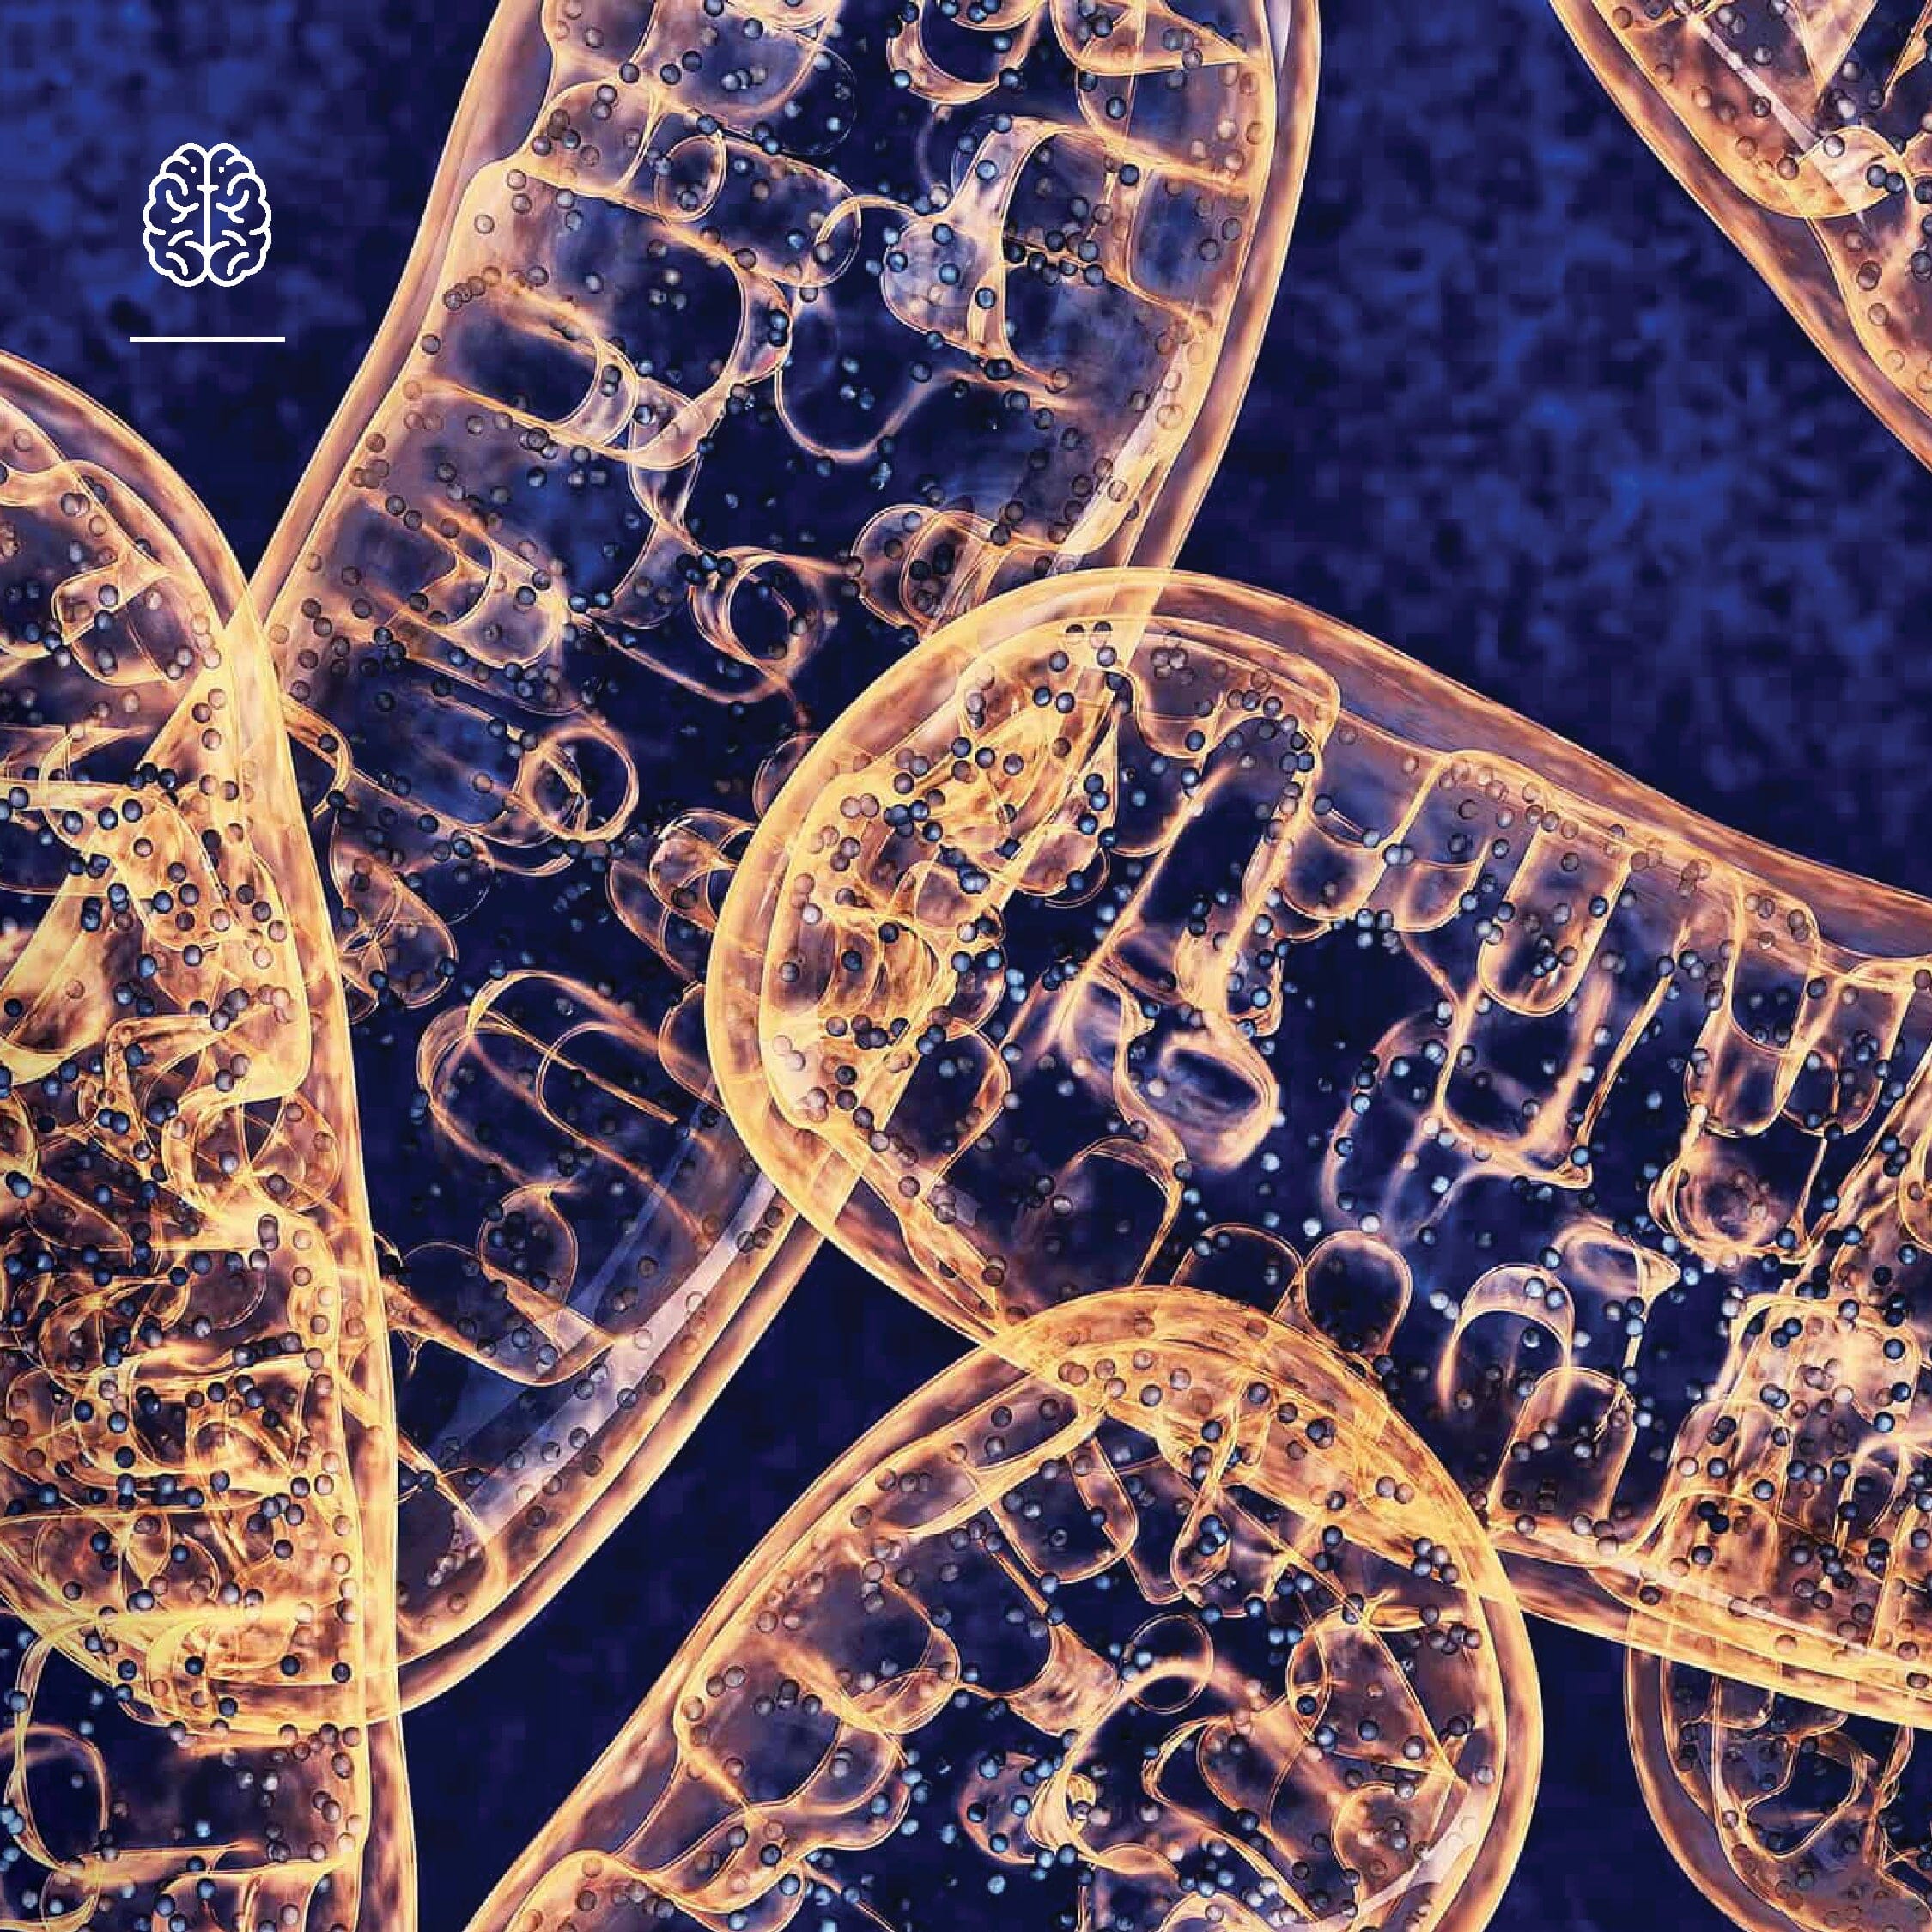 Mitochondria – your cellular power stations